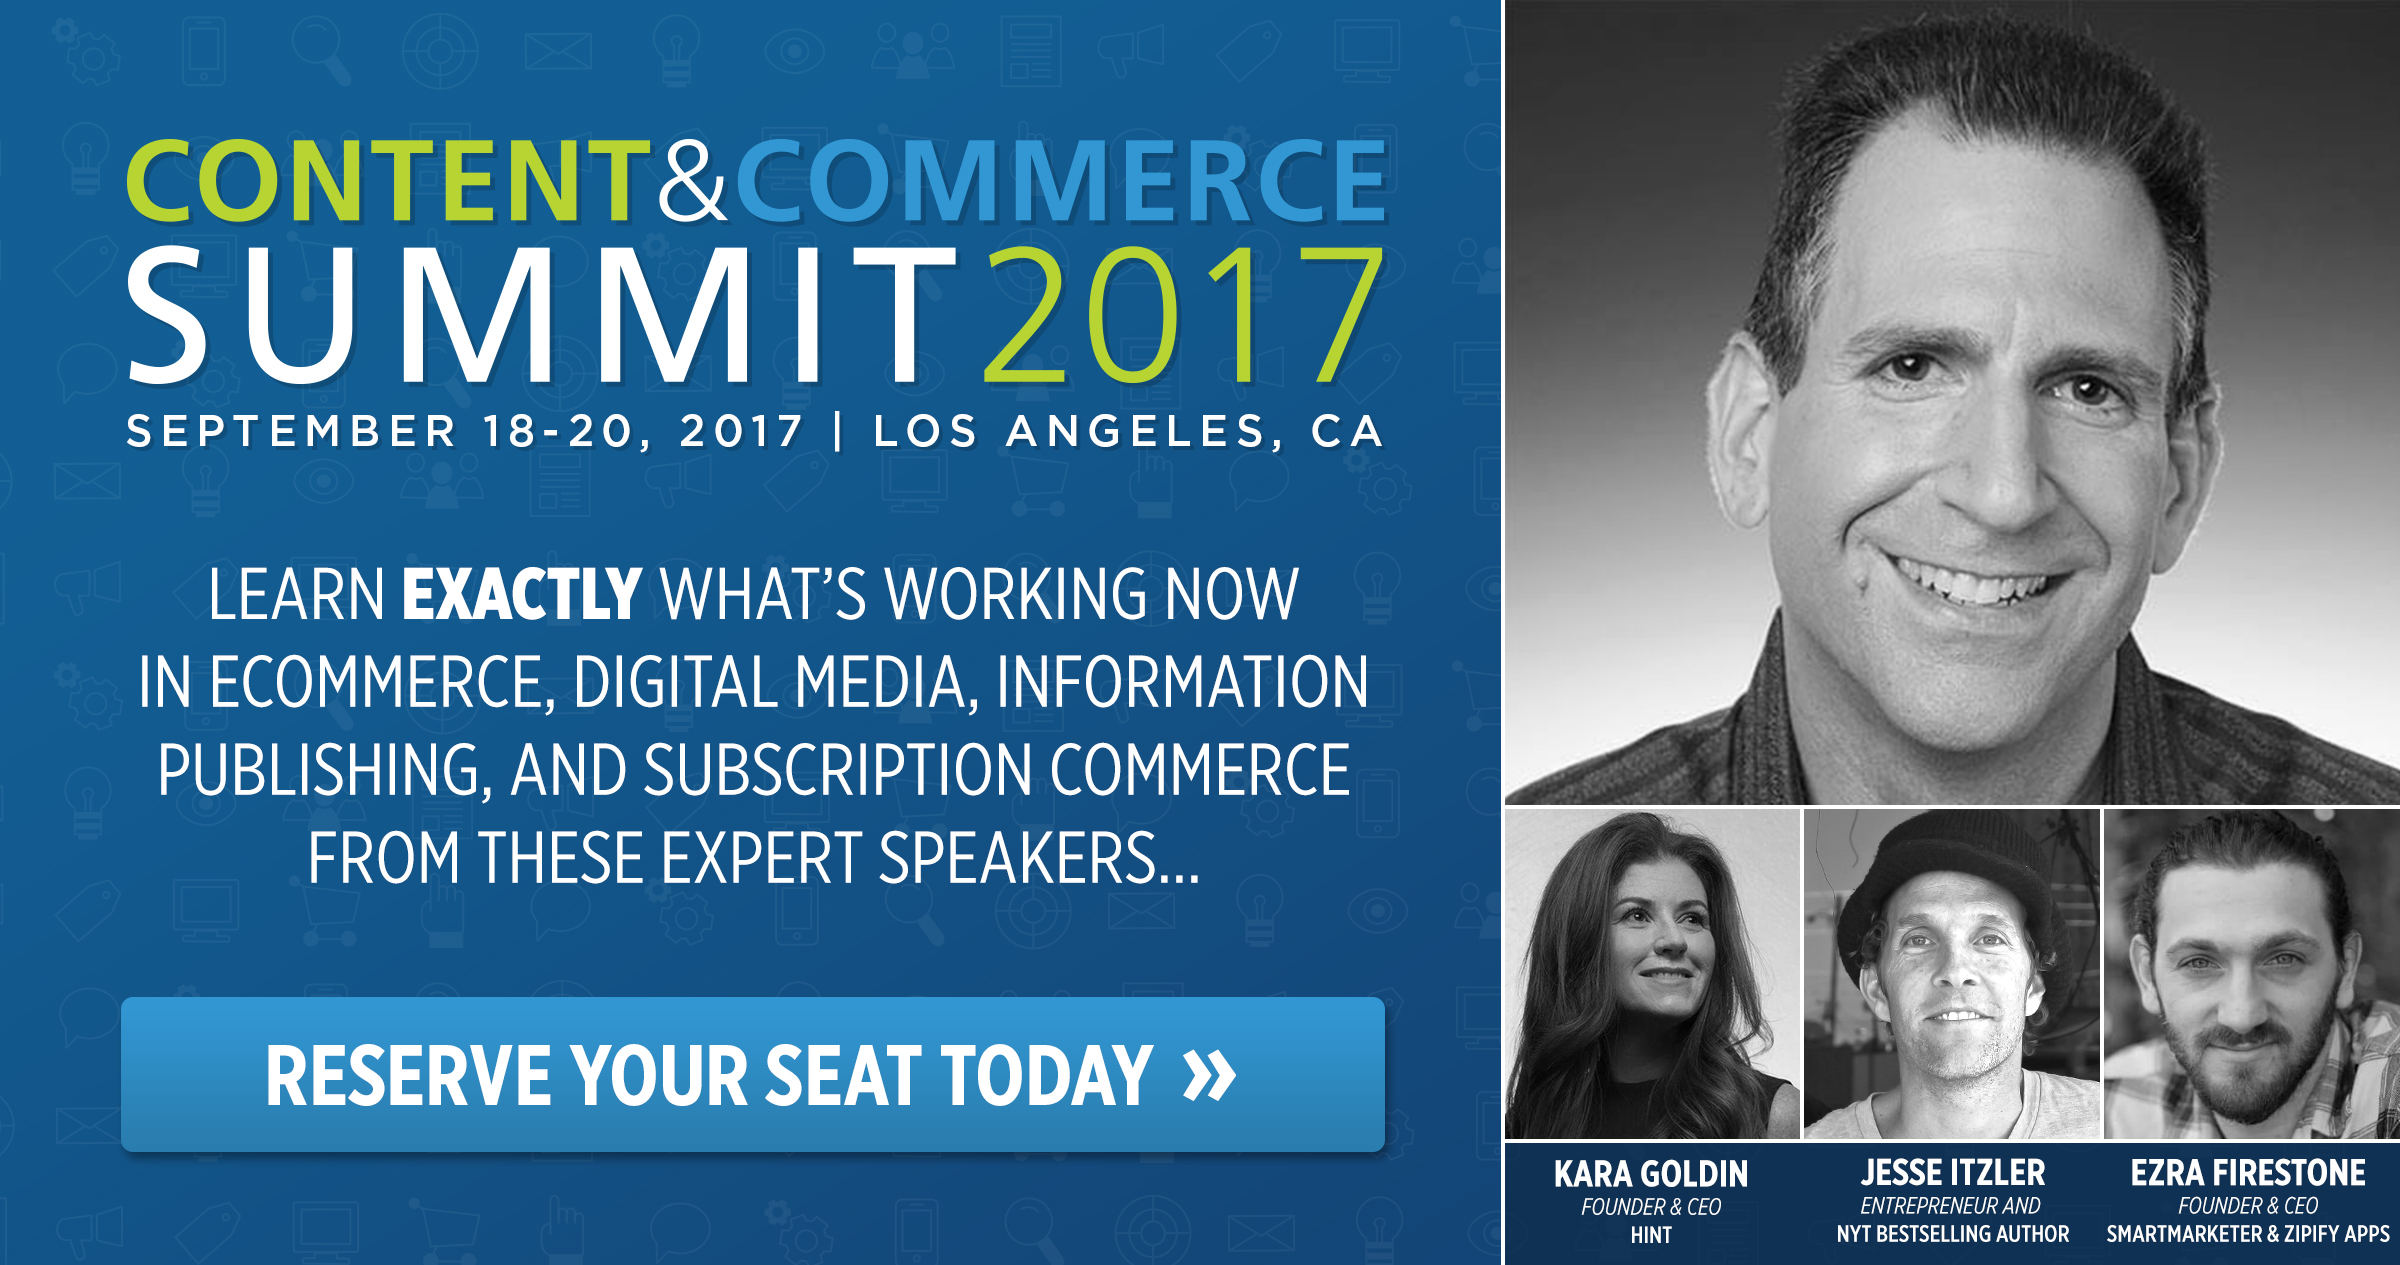 Reserve your seat at Content & Commerce 2017 today to see Bryan Eisenberg and other content and ecommerce experts speak live.